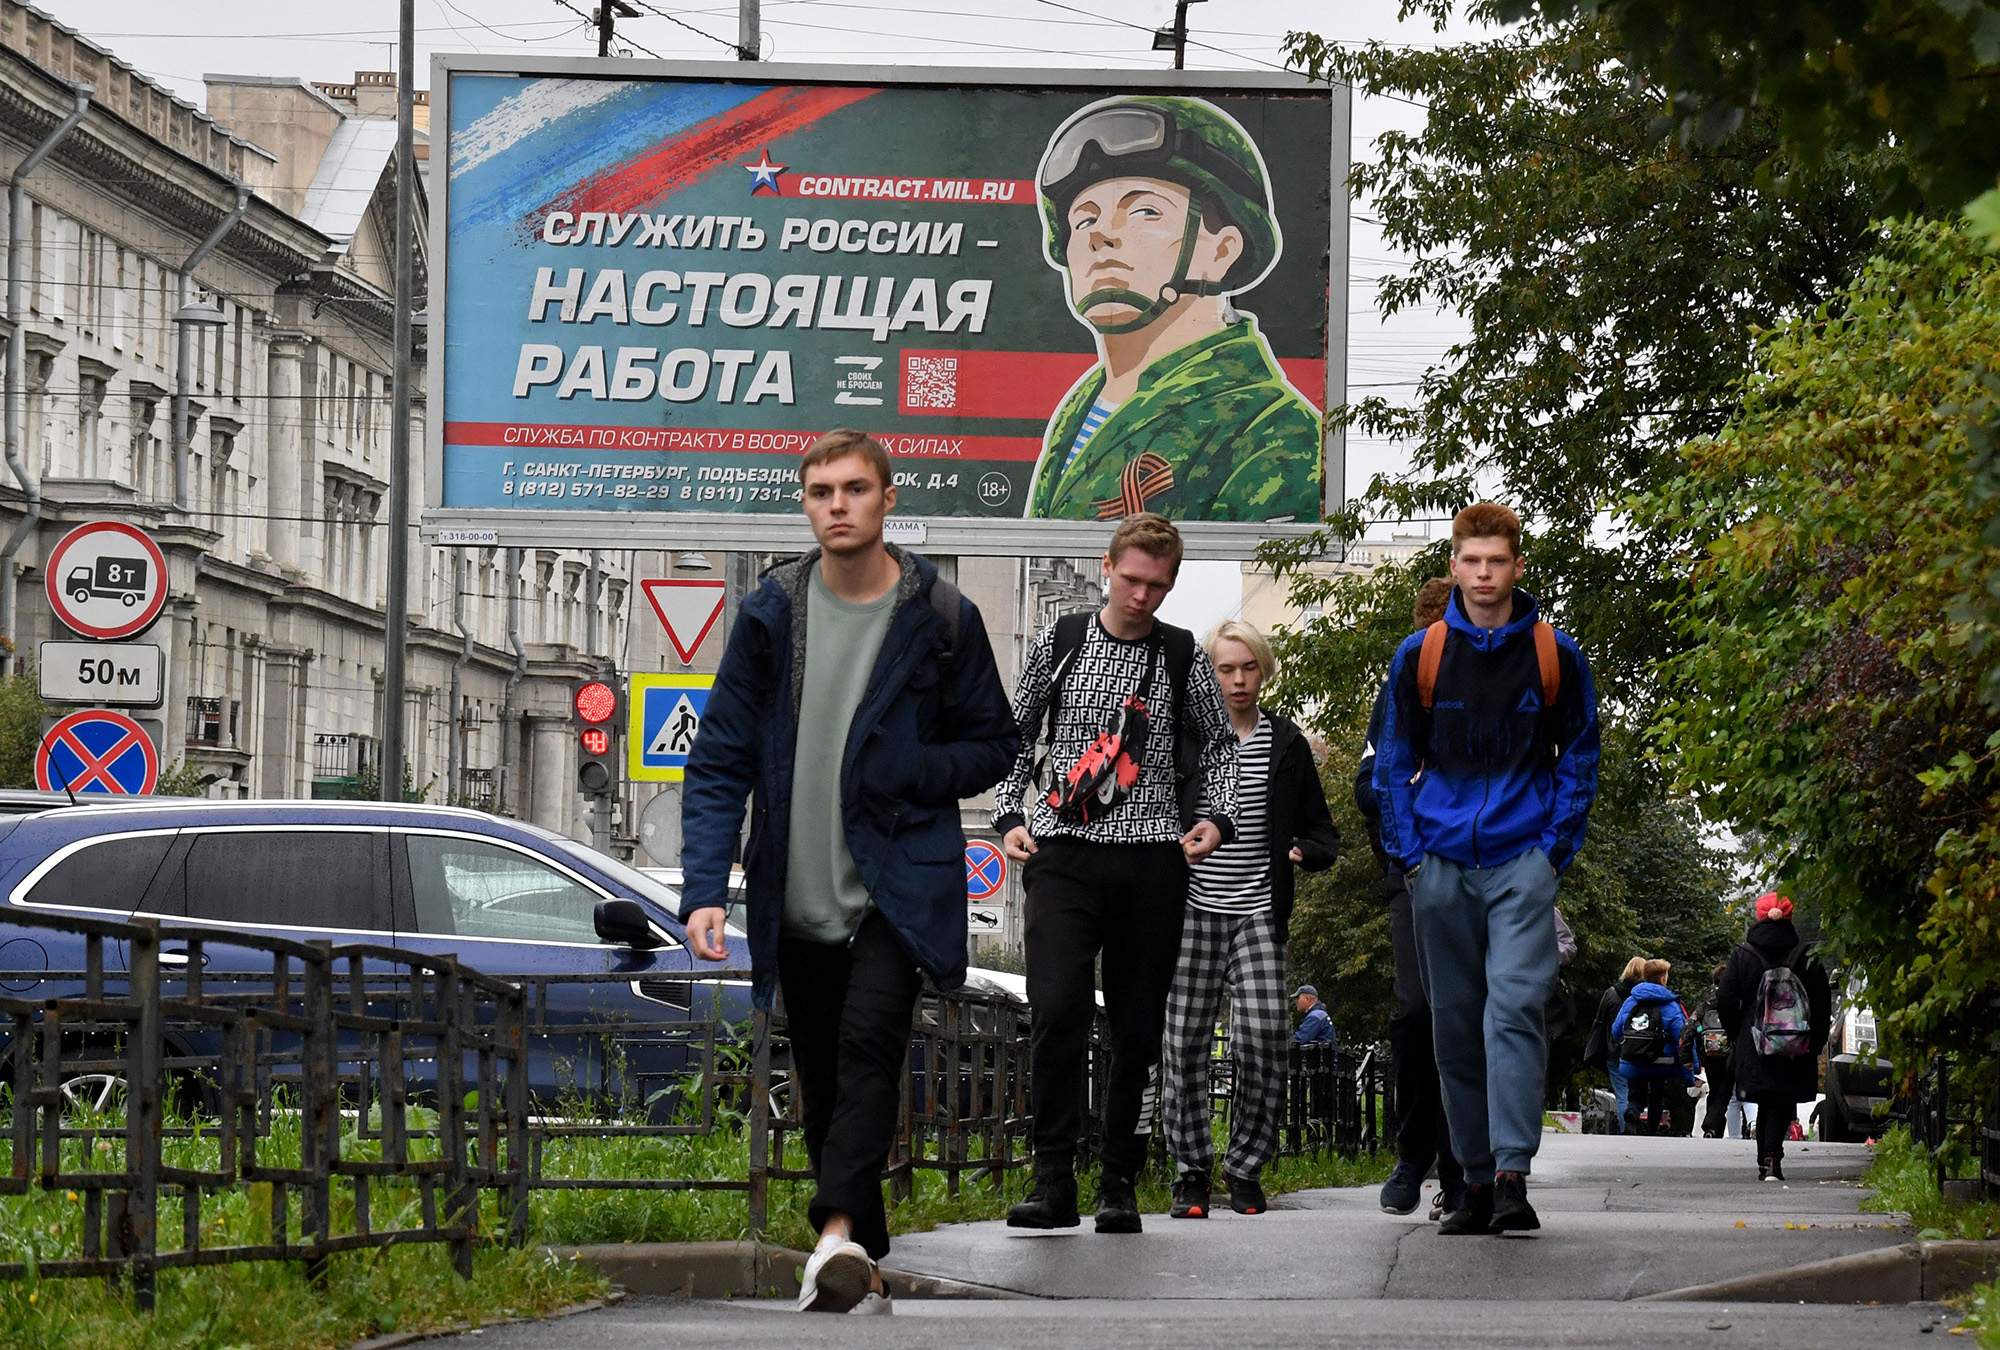 Young men walk in front of a billboard promoting contract army service with an image of a serviceman and the slogan reading "Serving Russia is a real job" in St Petersburg, Russia, on September 29.